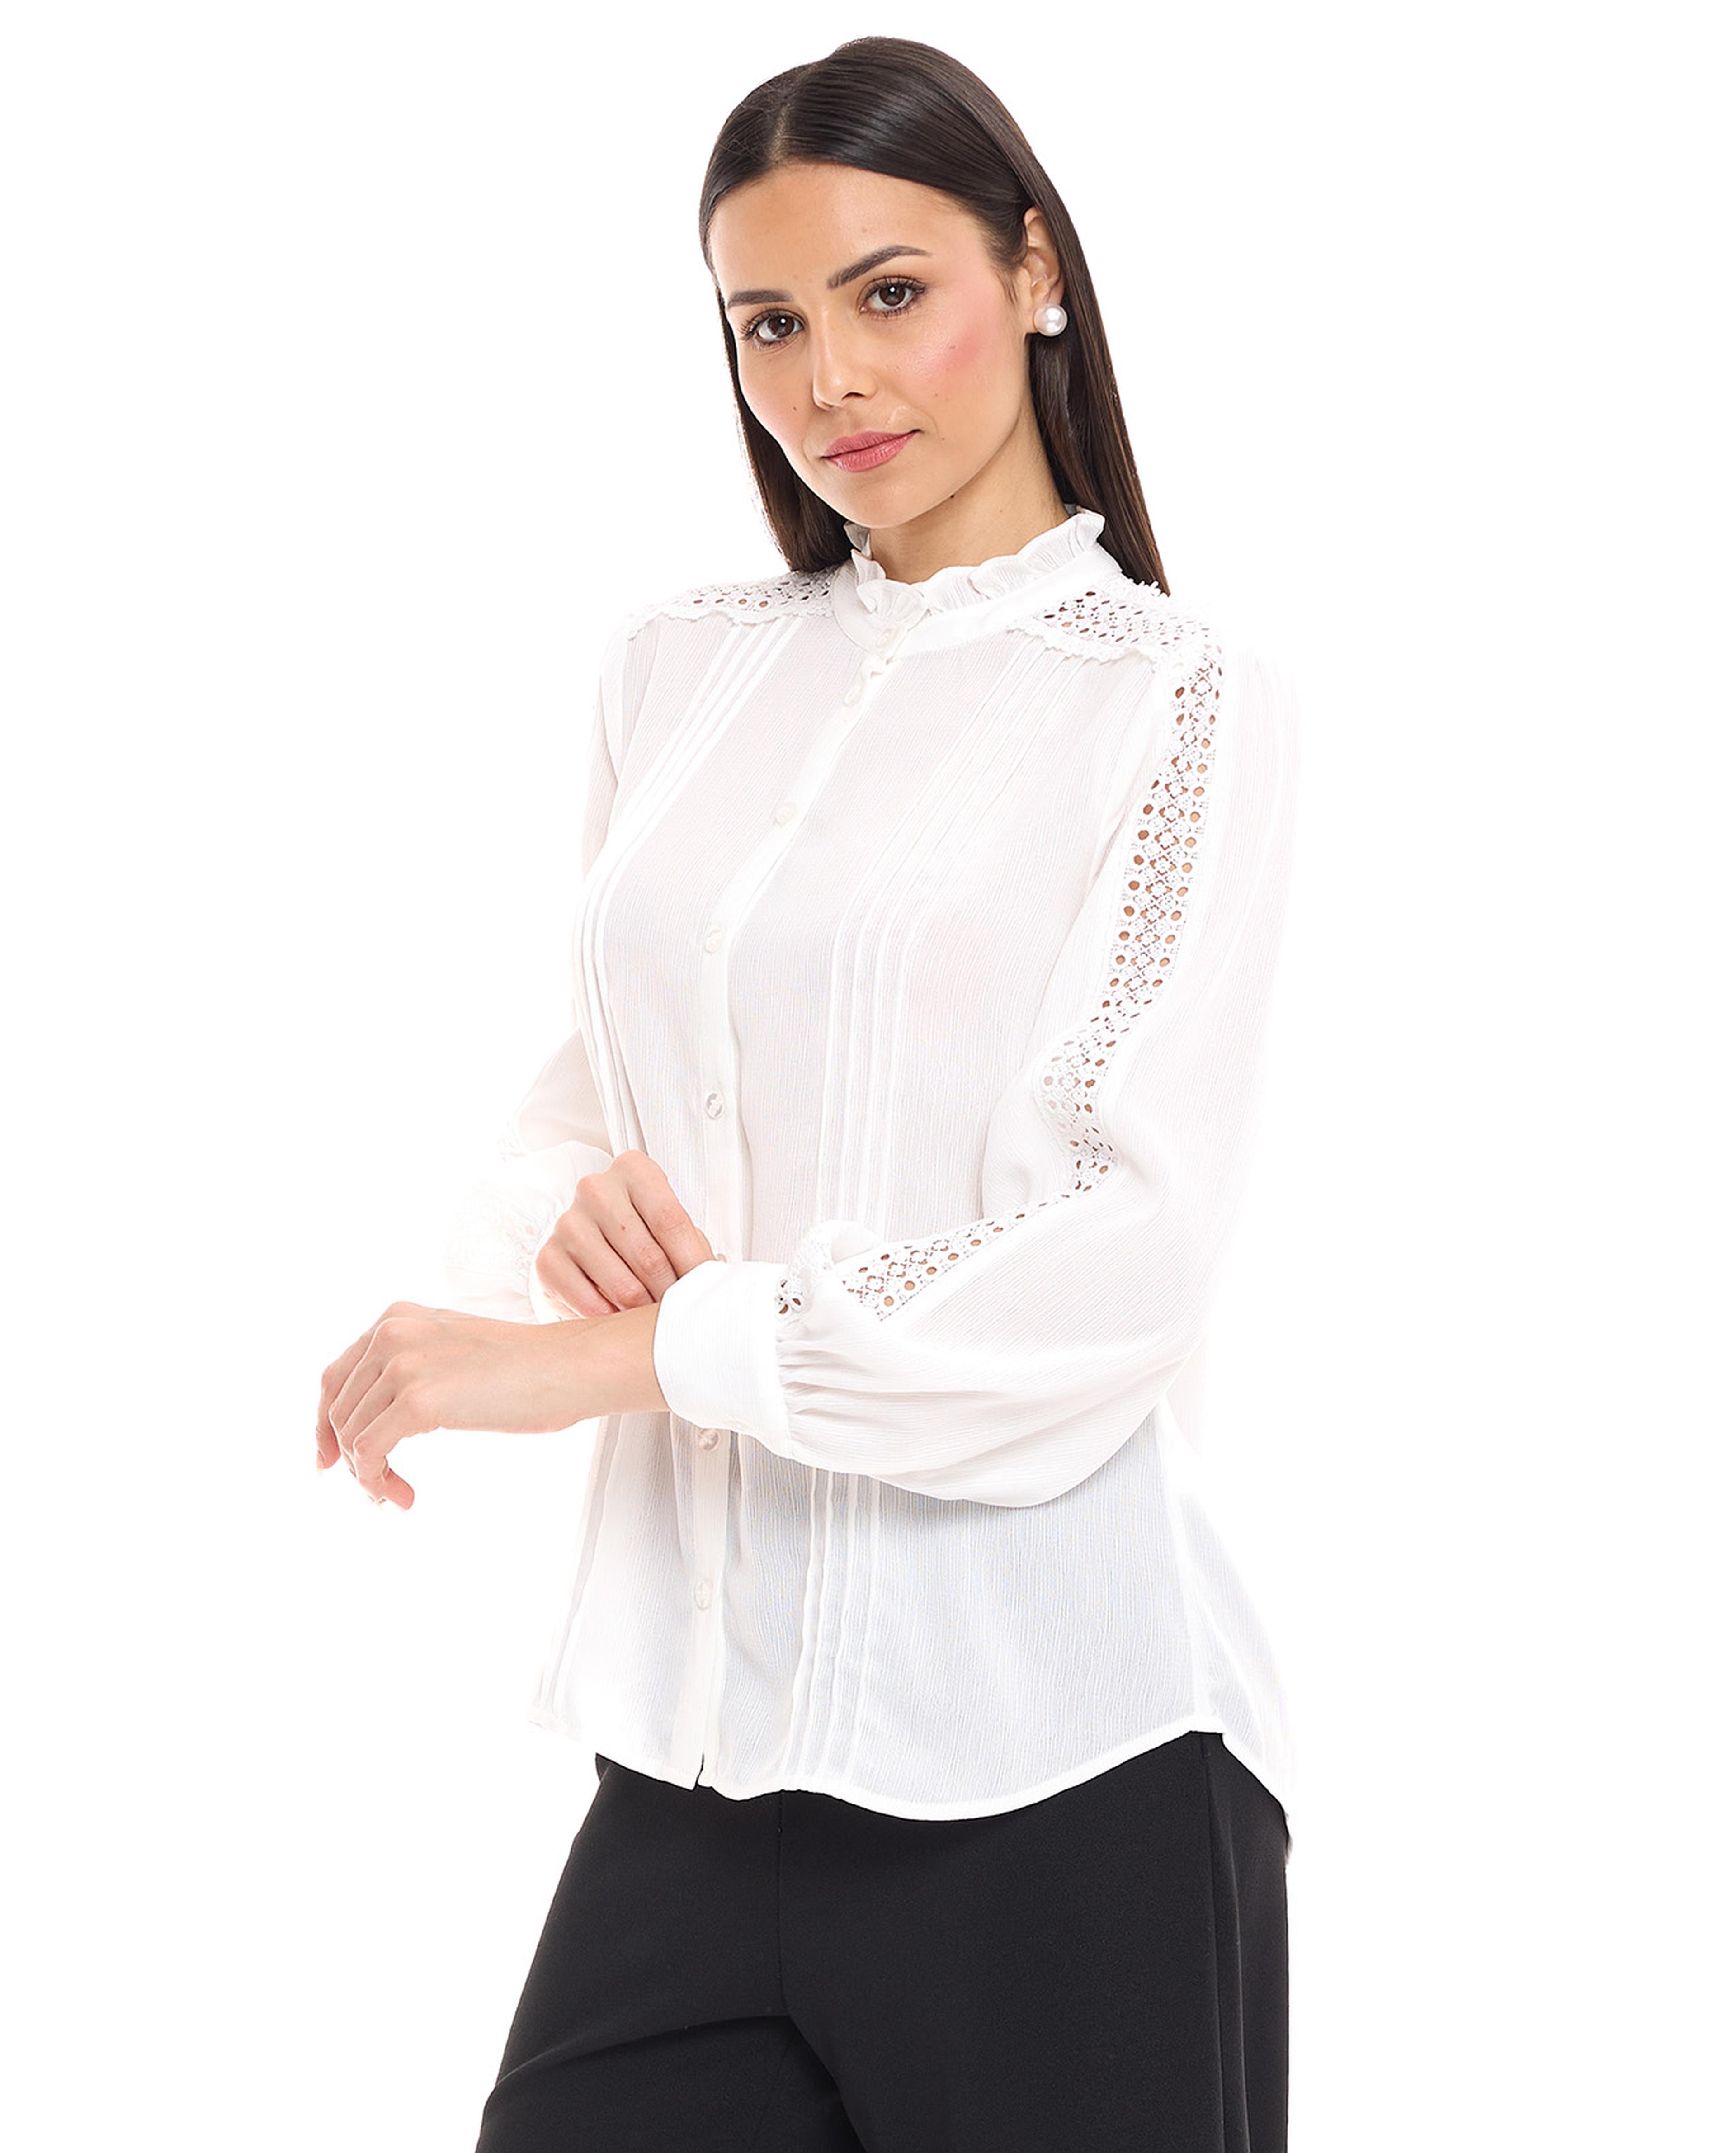 Lace Trim Top with Ruffle Neck and Bishop Sleeves